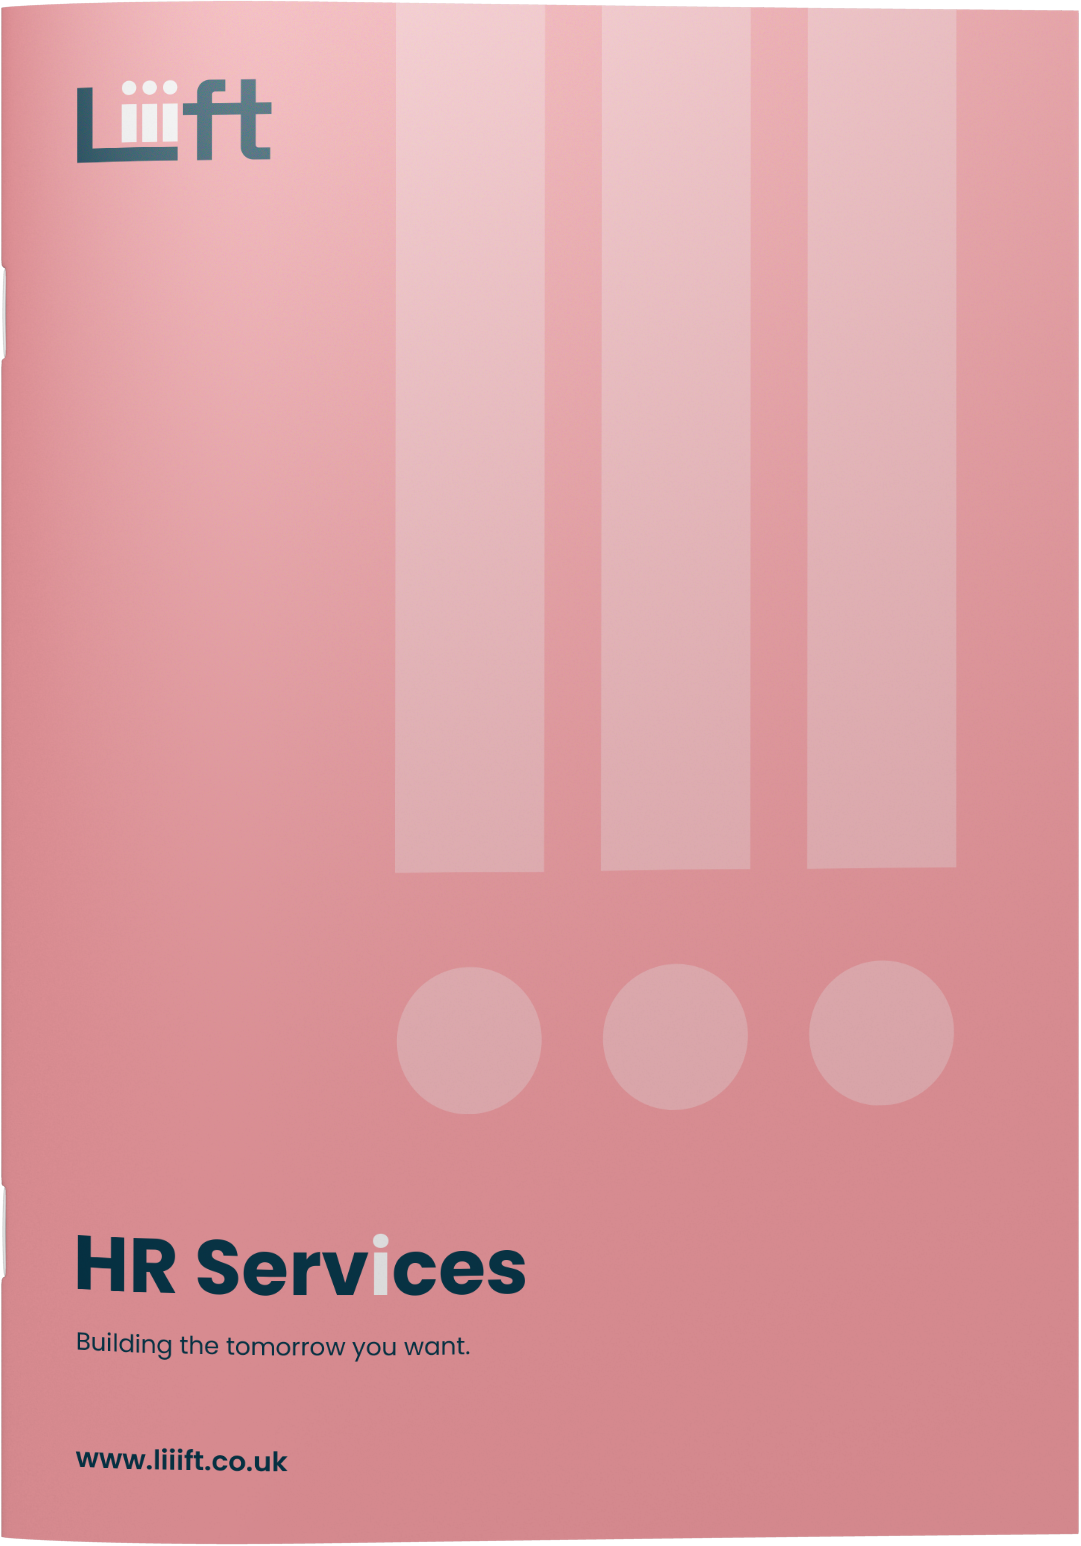 Image of the Liiift HR services brochure which when clicked will open the PDF containing our HR services.